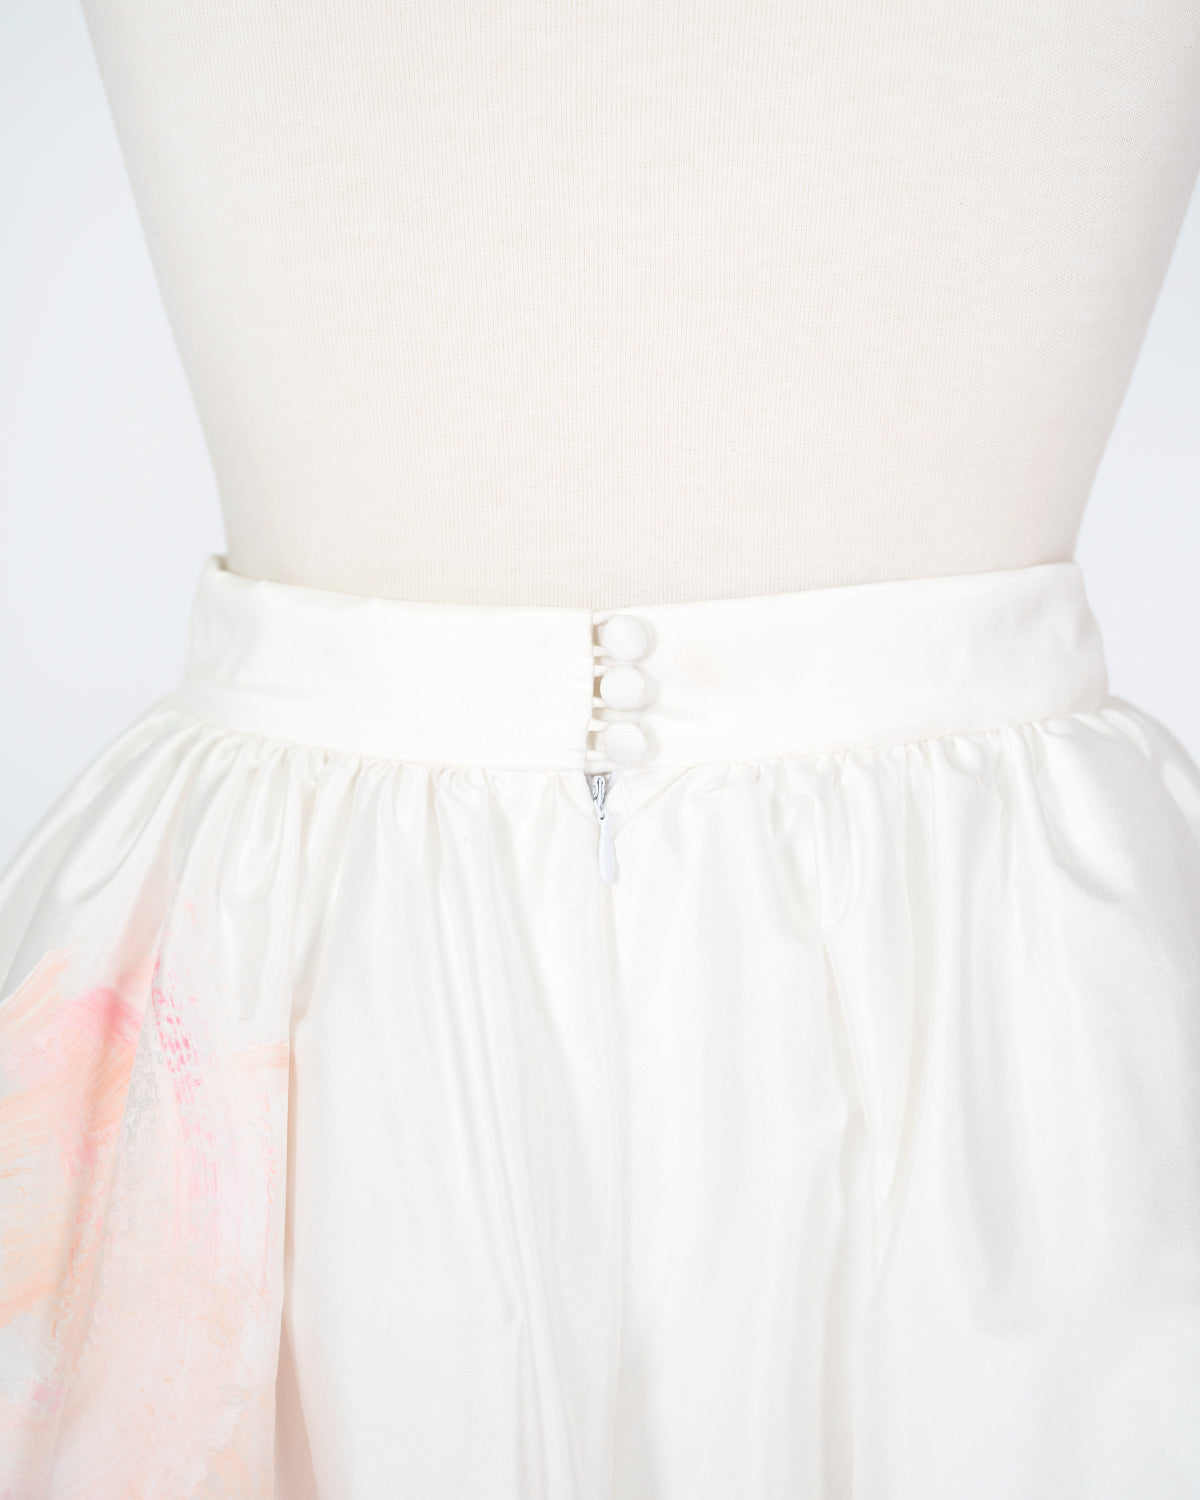 Dahlia Skirt With Sweep | Size 8 - Tiff Manuell